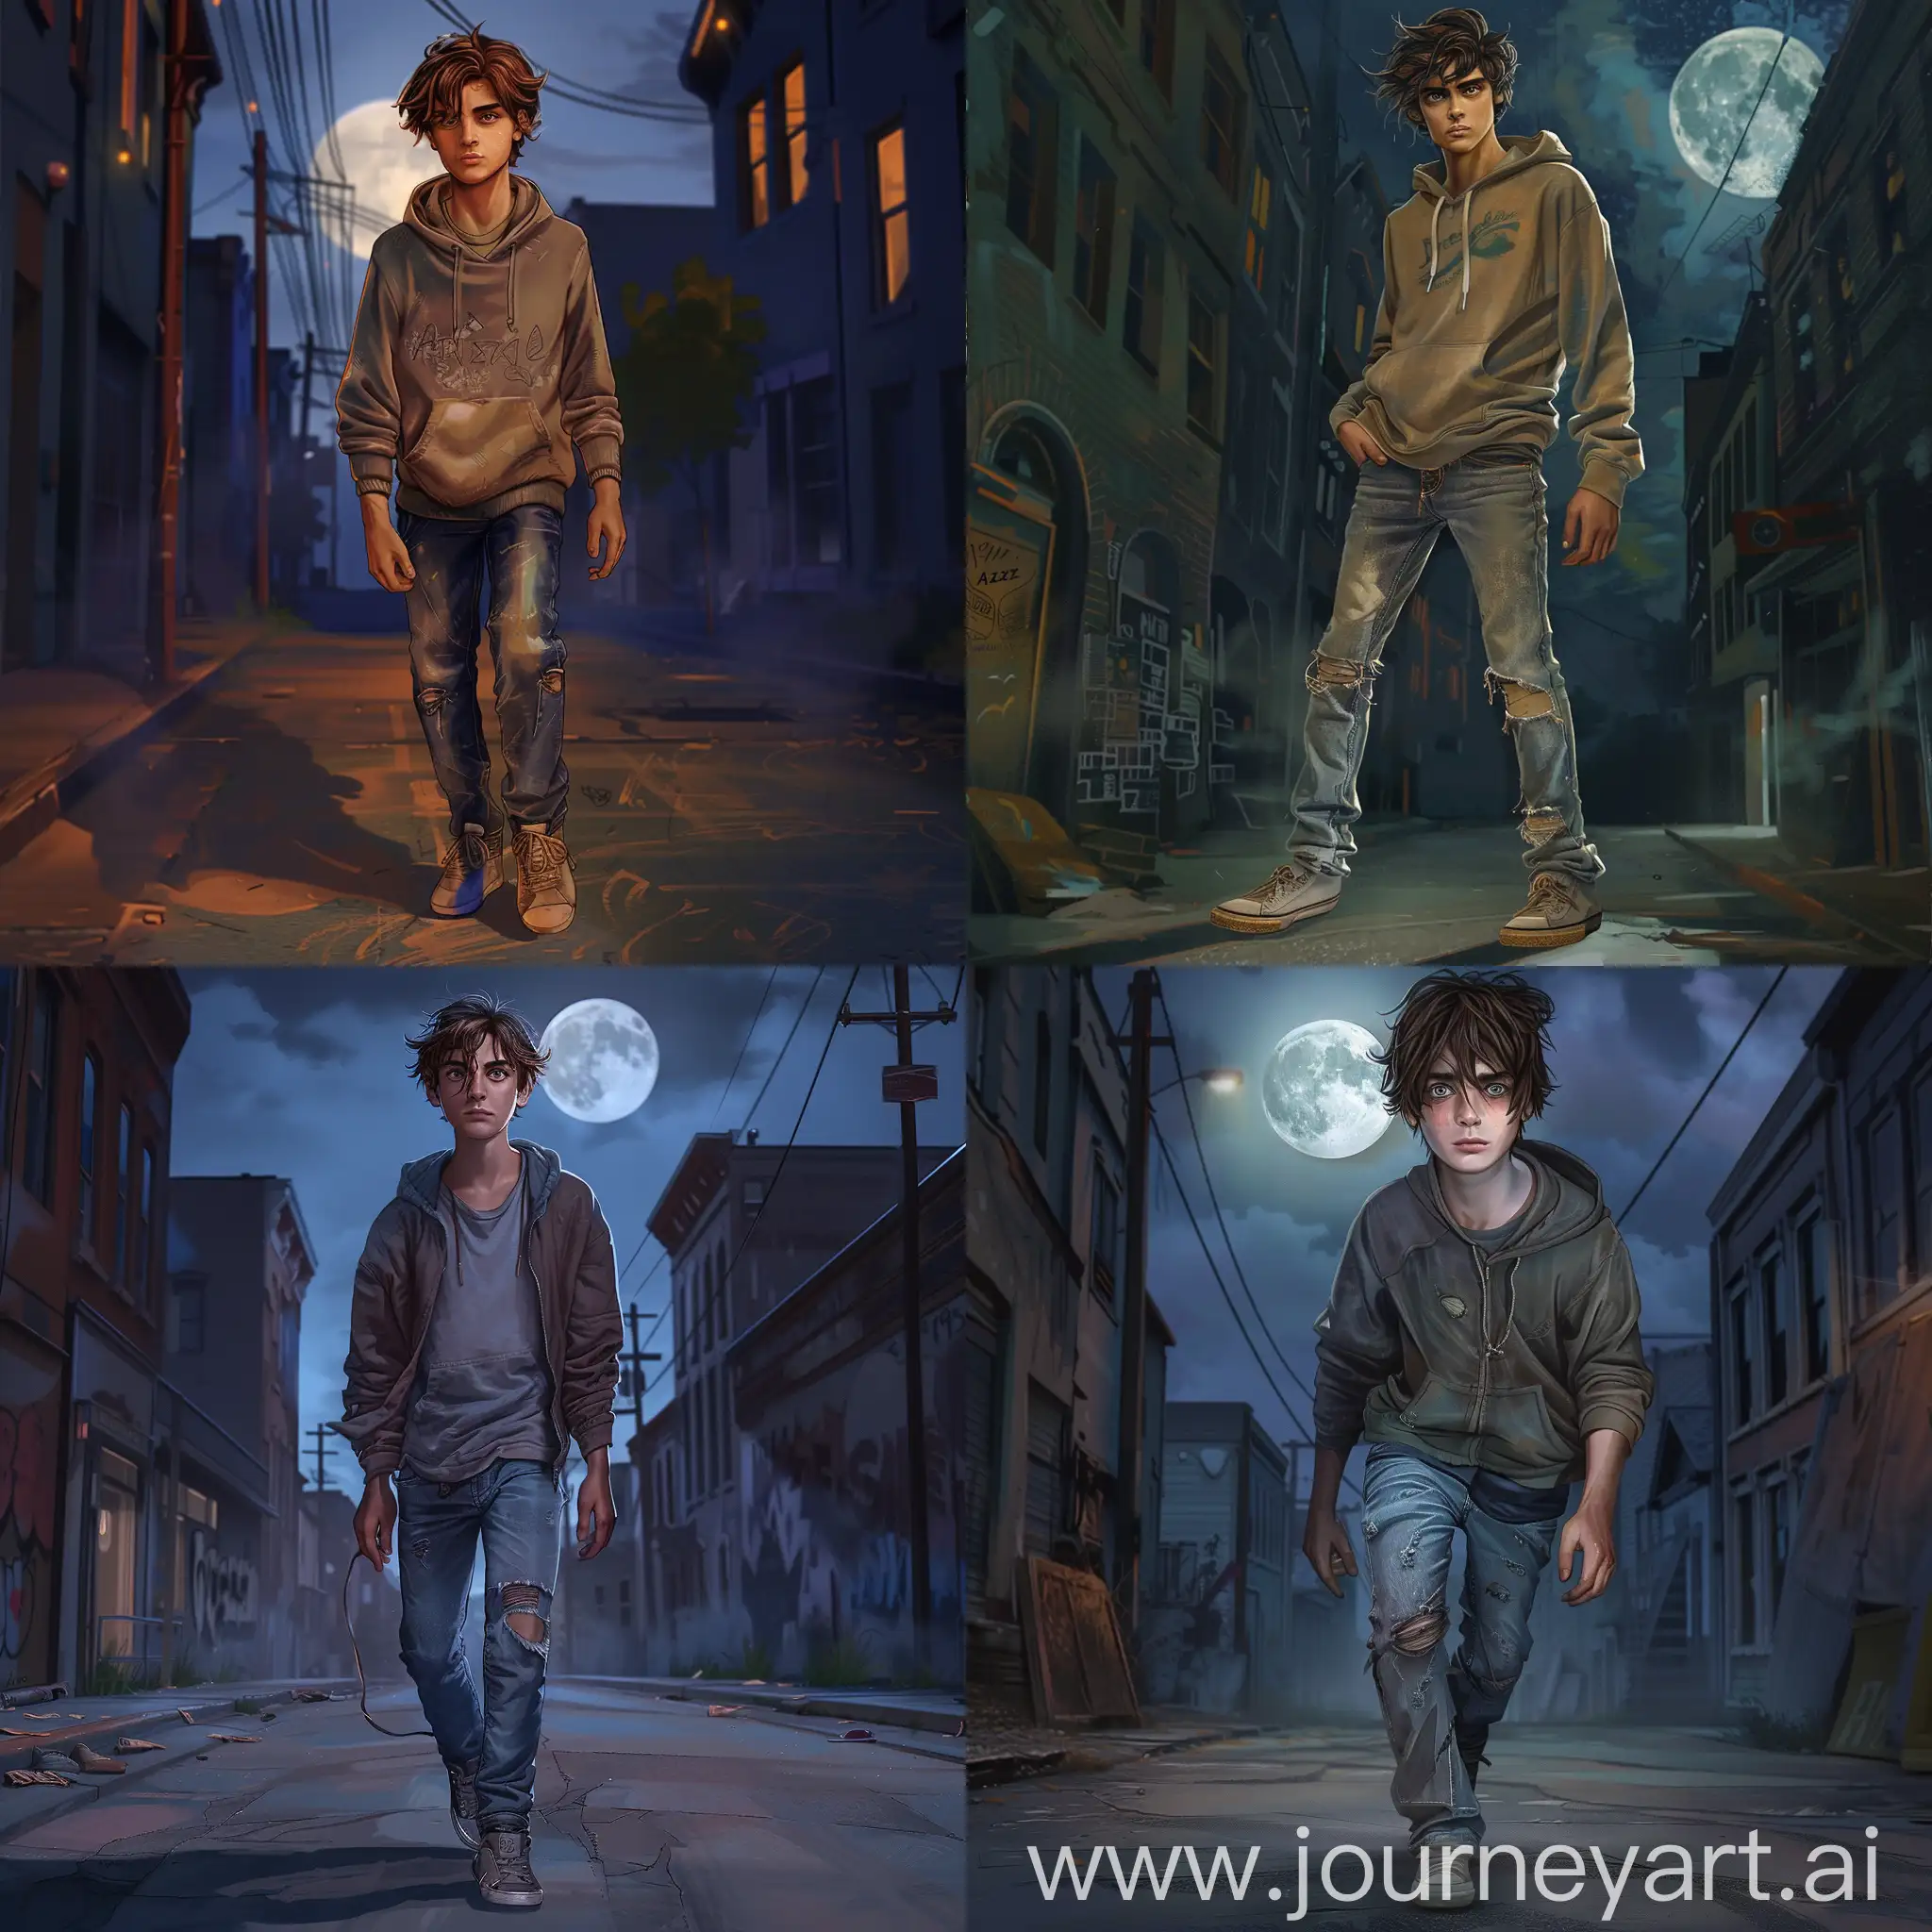 Create a hyper realistic image As the moon hangs low in the sky, casting eerie shadows across the deserted streets, Alex hurries home from his part-time job at the local diner. His hazel eyes gleam with a mix of curiosity and mischief, reflecting his adventurous spirit. With tousled brown hair that falls just above his ears, he embodies the essence of a typical teenager. His lean build, toned from years of playing sports and working part-time jobs, speaks volumes about his dedication and resilience. Clad in a worn-out hoodie, faded jeans, and scuffed sneakers, Alex's laid-back style complements the calmness of the night around him. In the backdrop of dimly lit alleyways and looming buildings, he appears as a solitary figure, a wanderer amidst the mysteries of his small town.